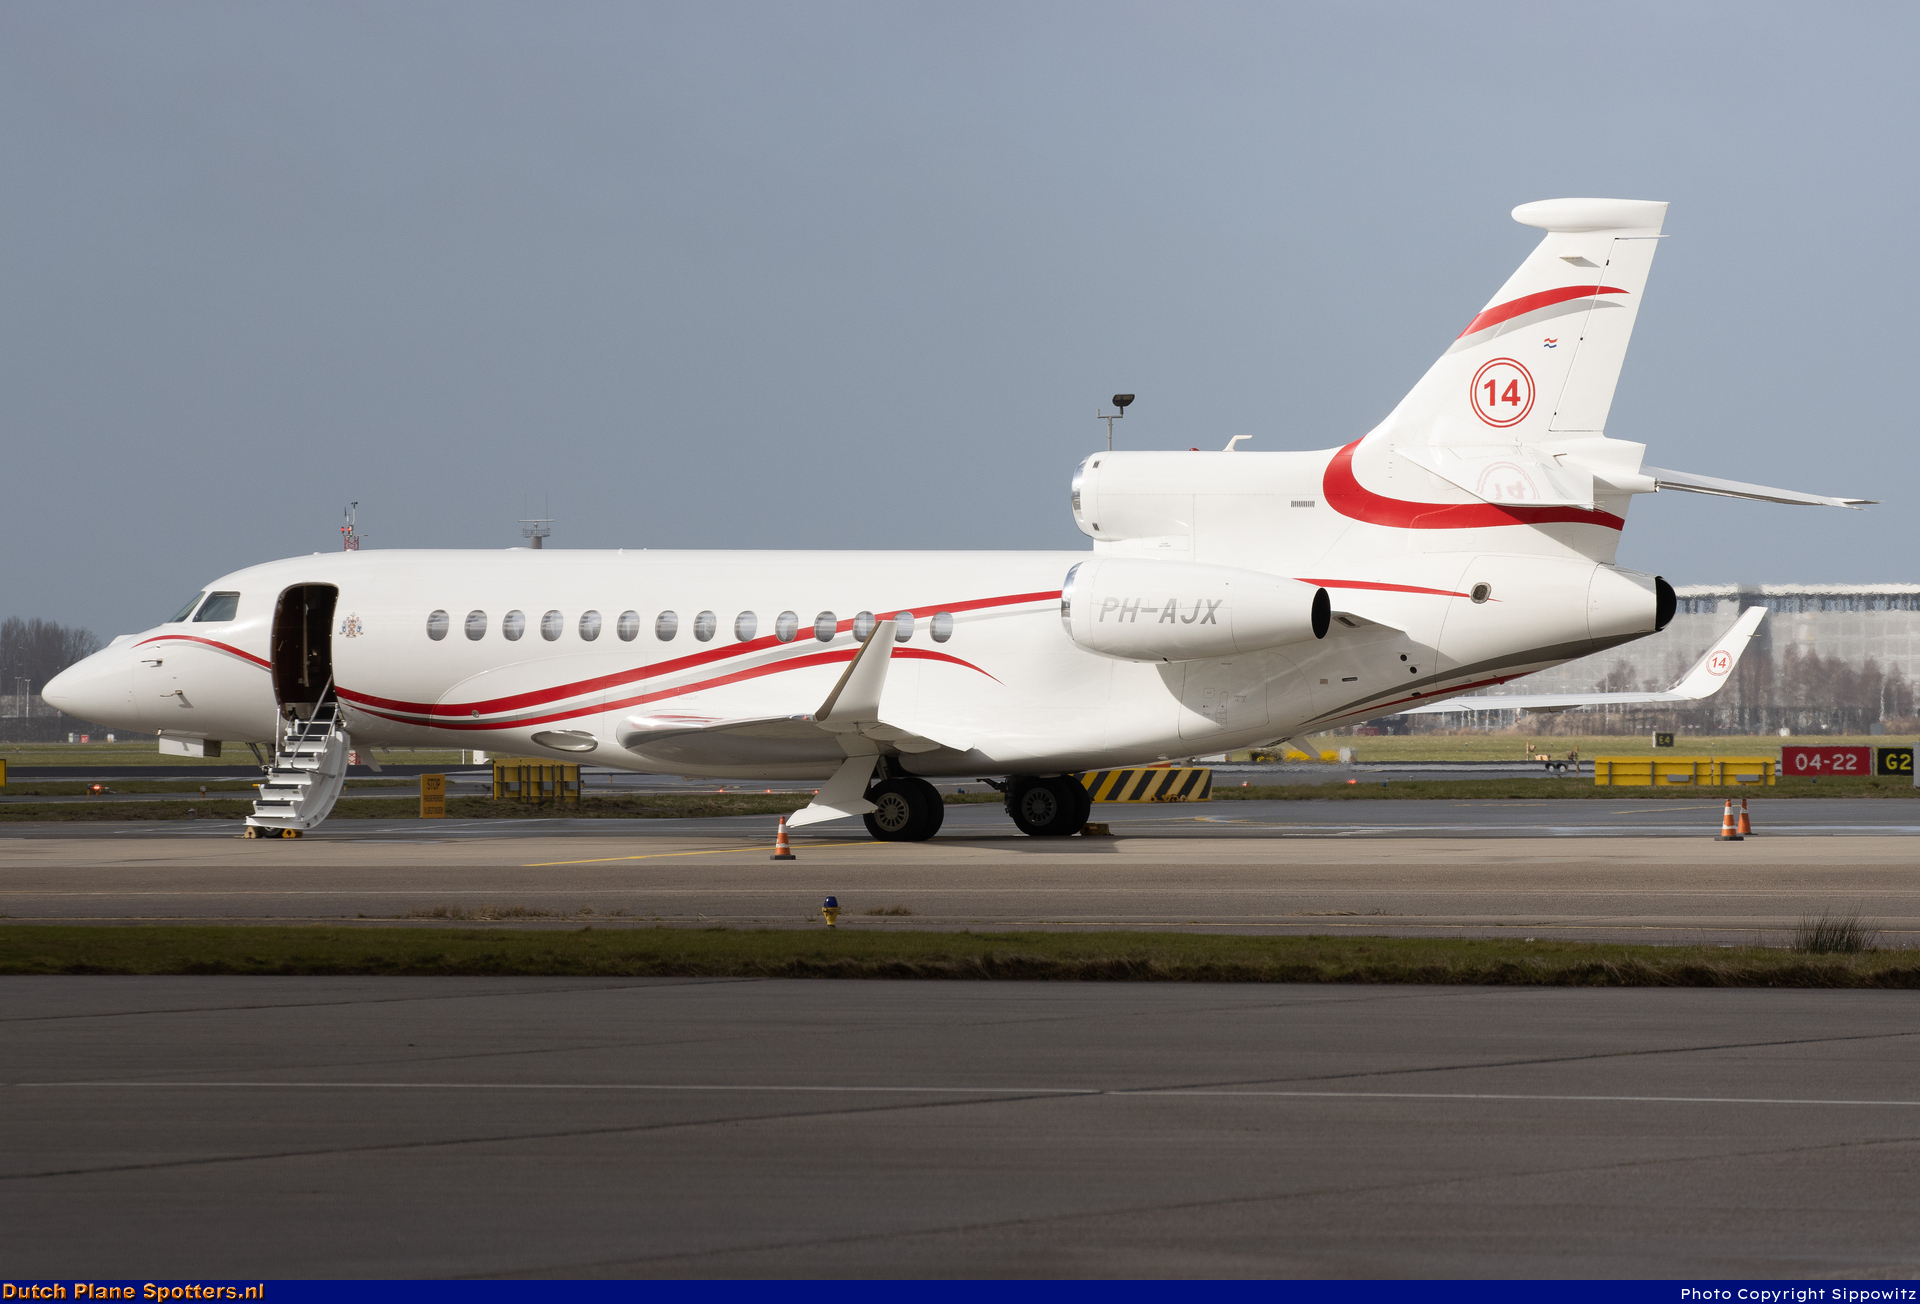 PH-AJX Dassault Falcon 7X Private by Sippowitz